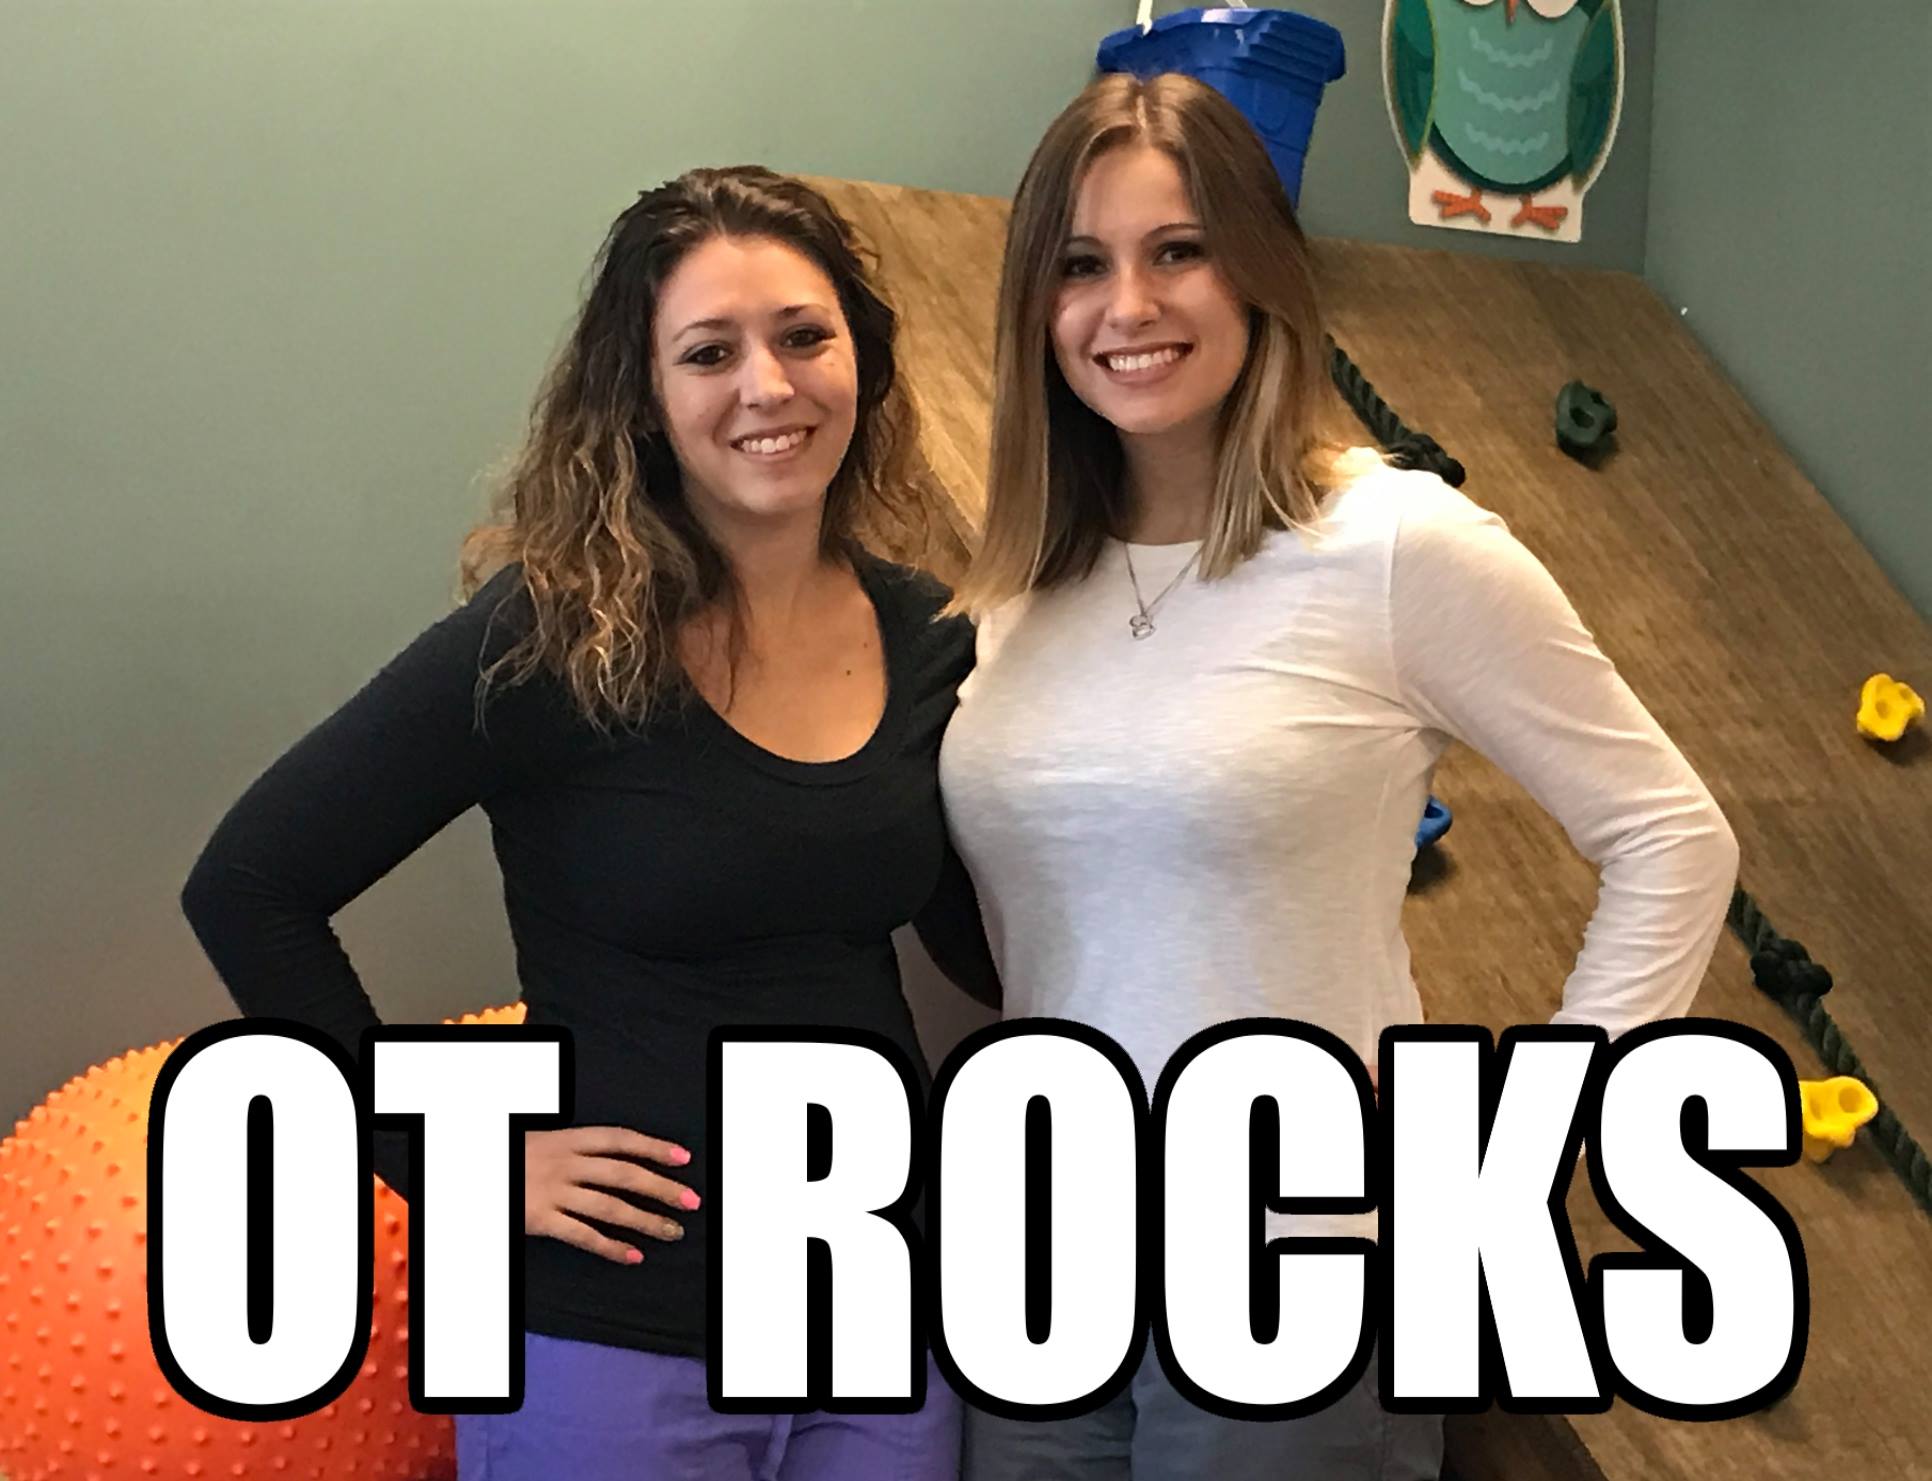 Occupational Therapy ROCKS!